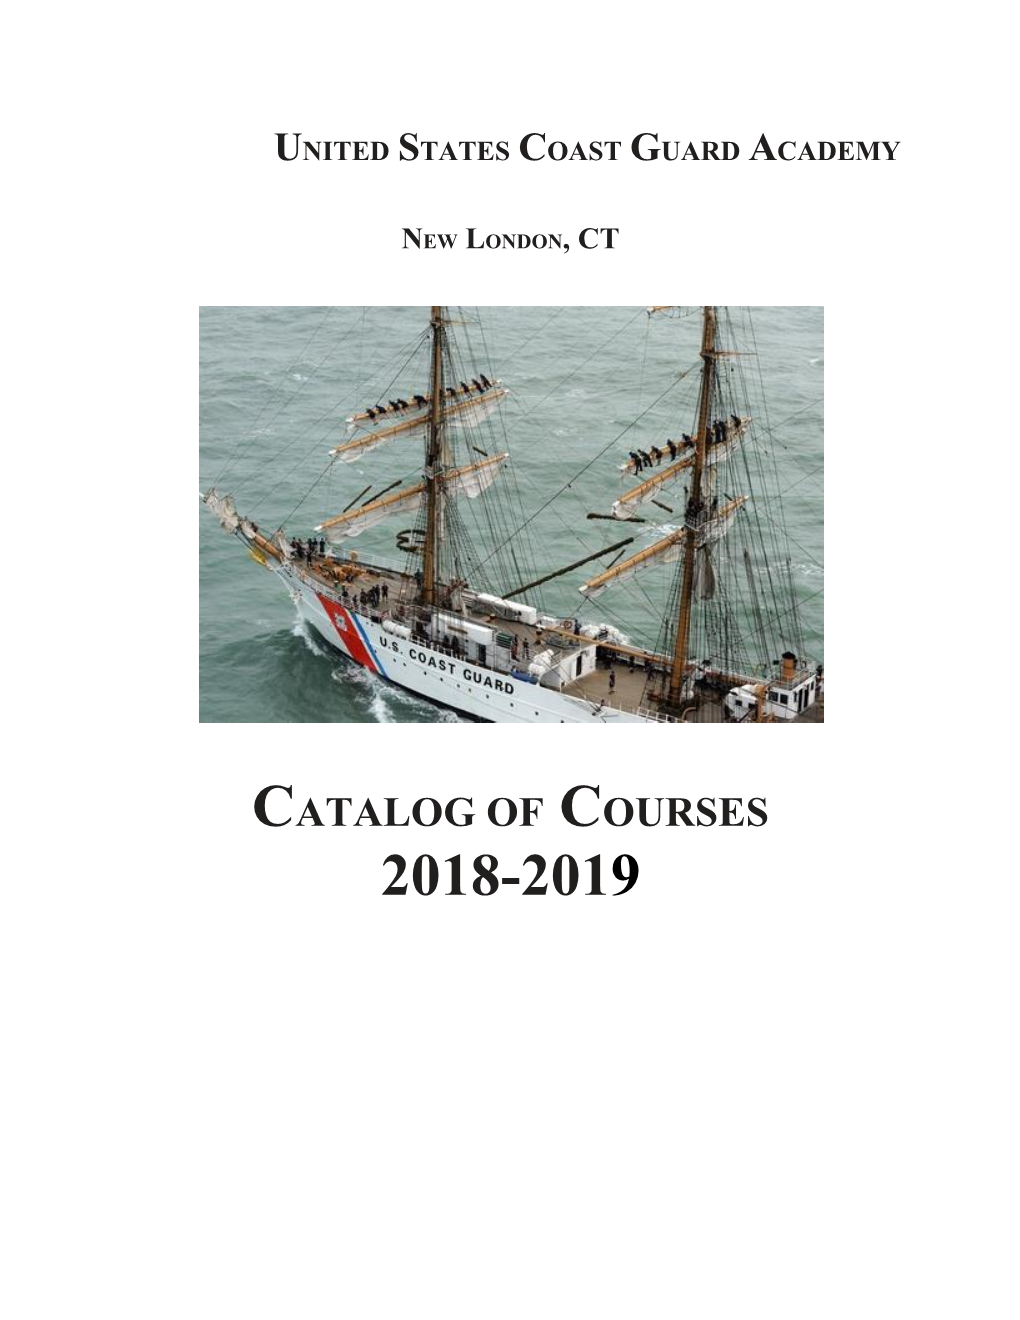 Catalog of Courses 2018-2019